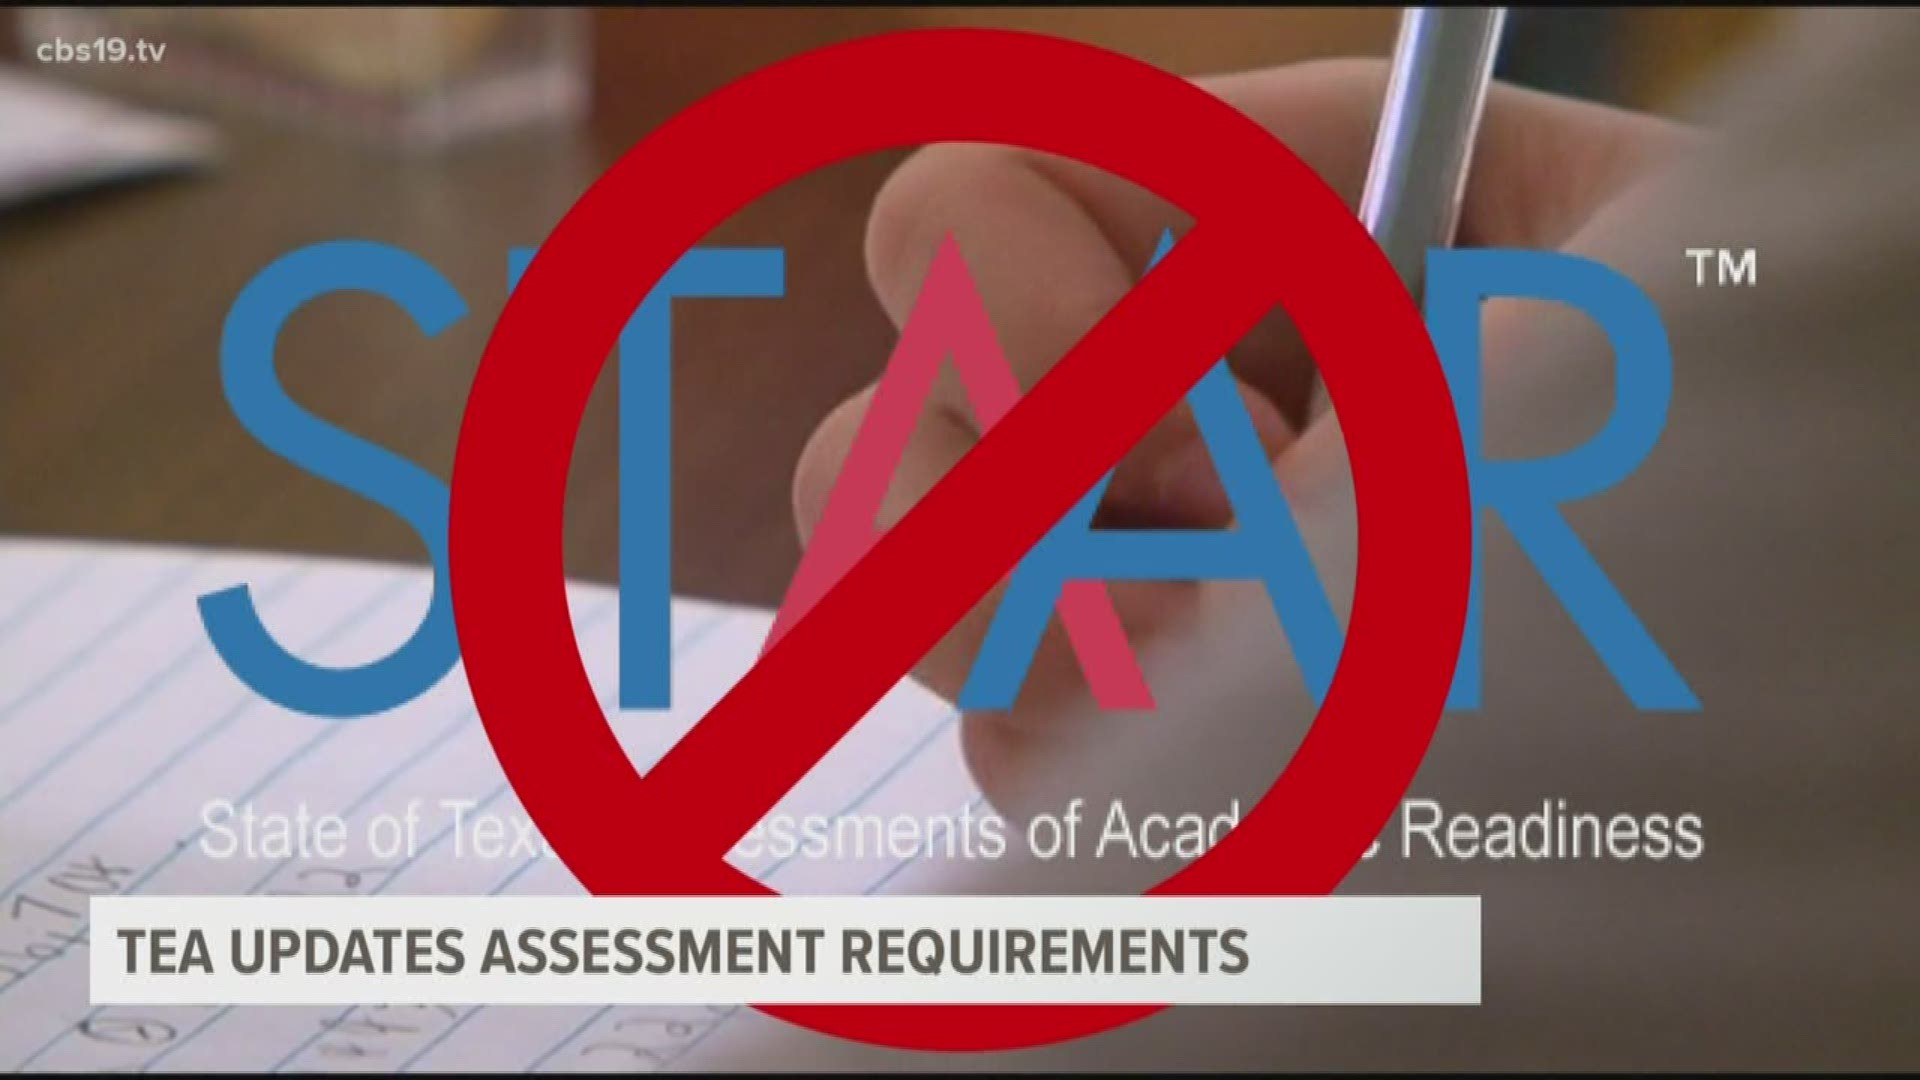 Academic assessment requirements are suspended for the remainder of the year. The district must determine how students will advance to the next grade level.